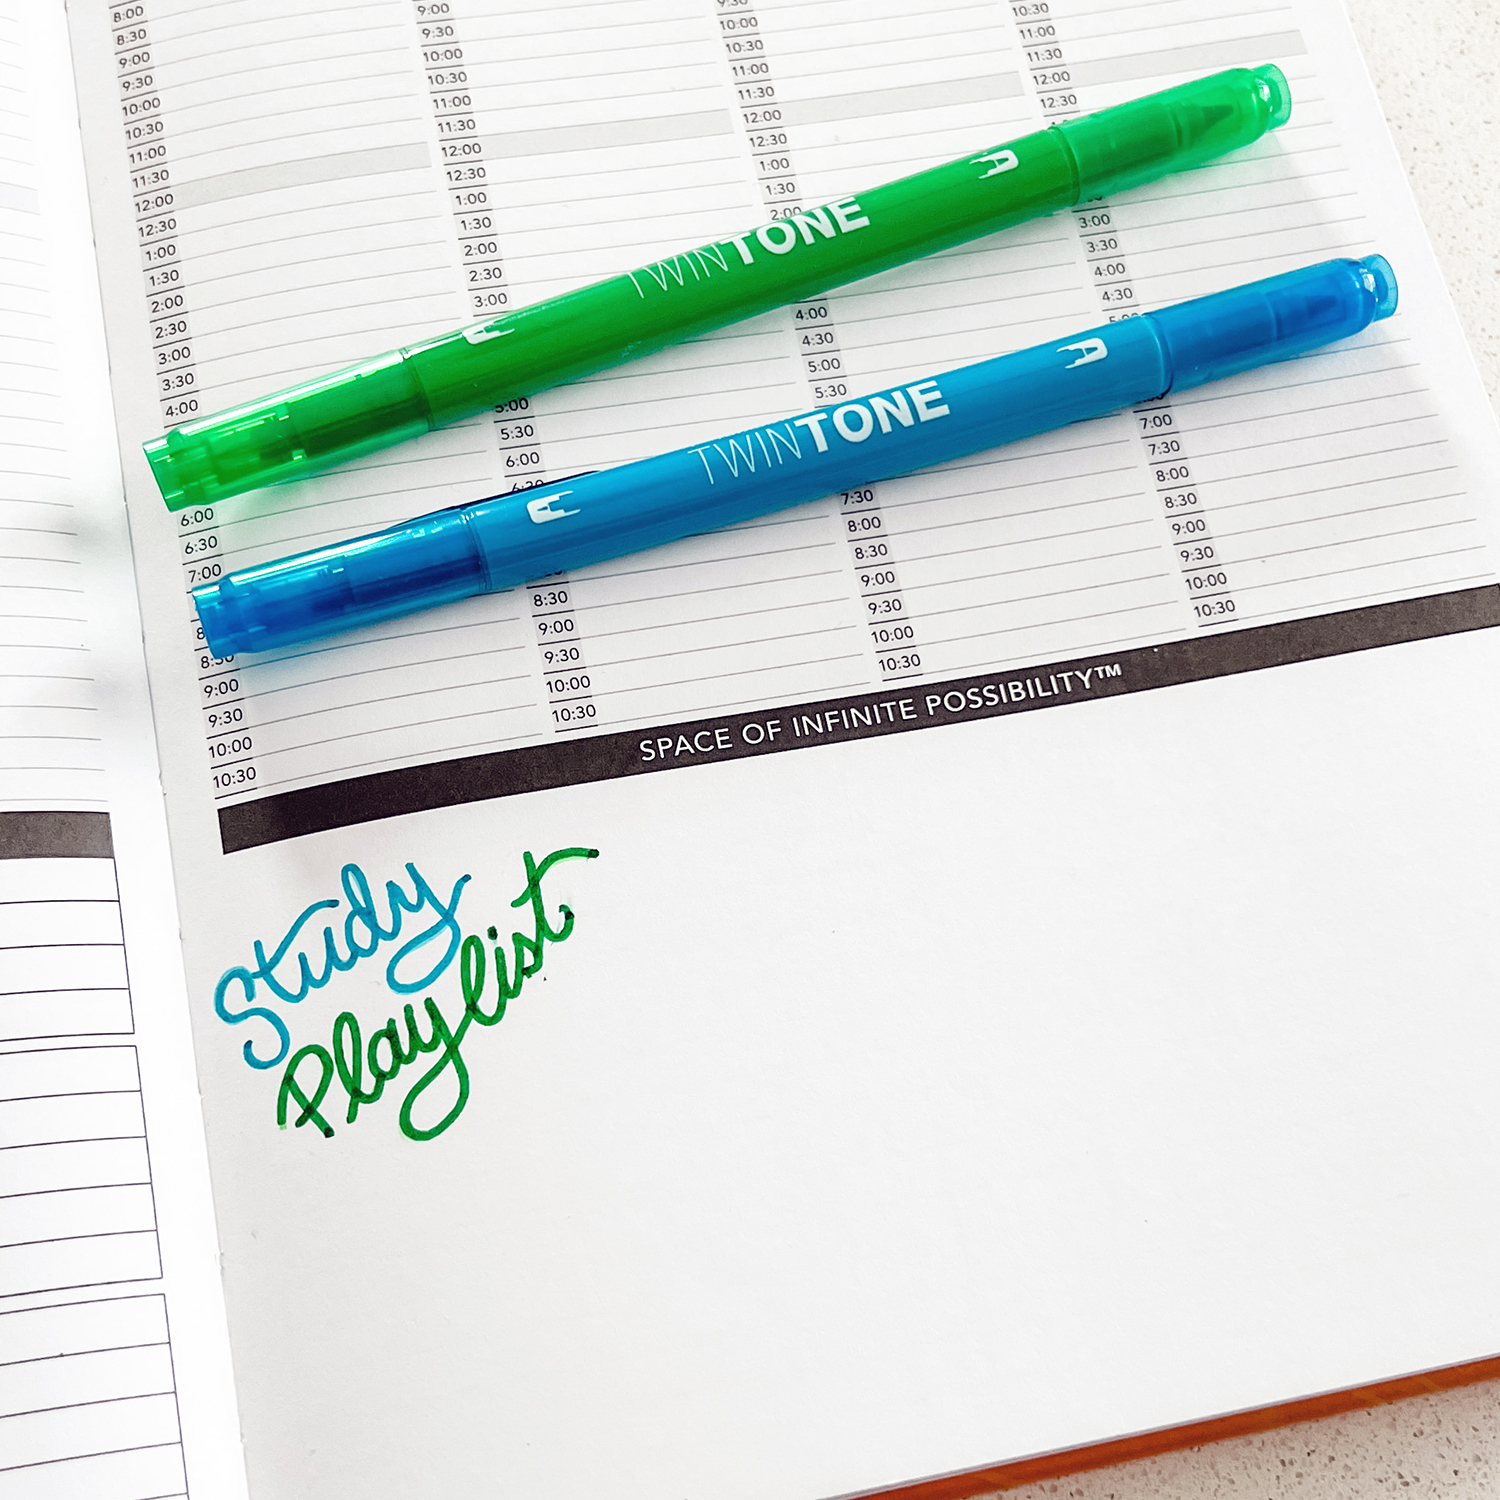 Planner Ideas for School by Jessica Mack on behalf of Tombow